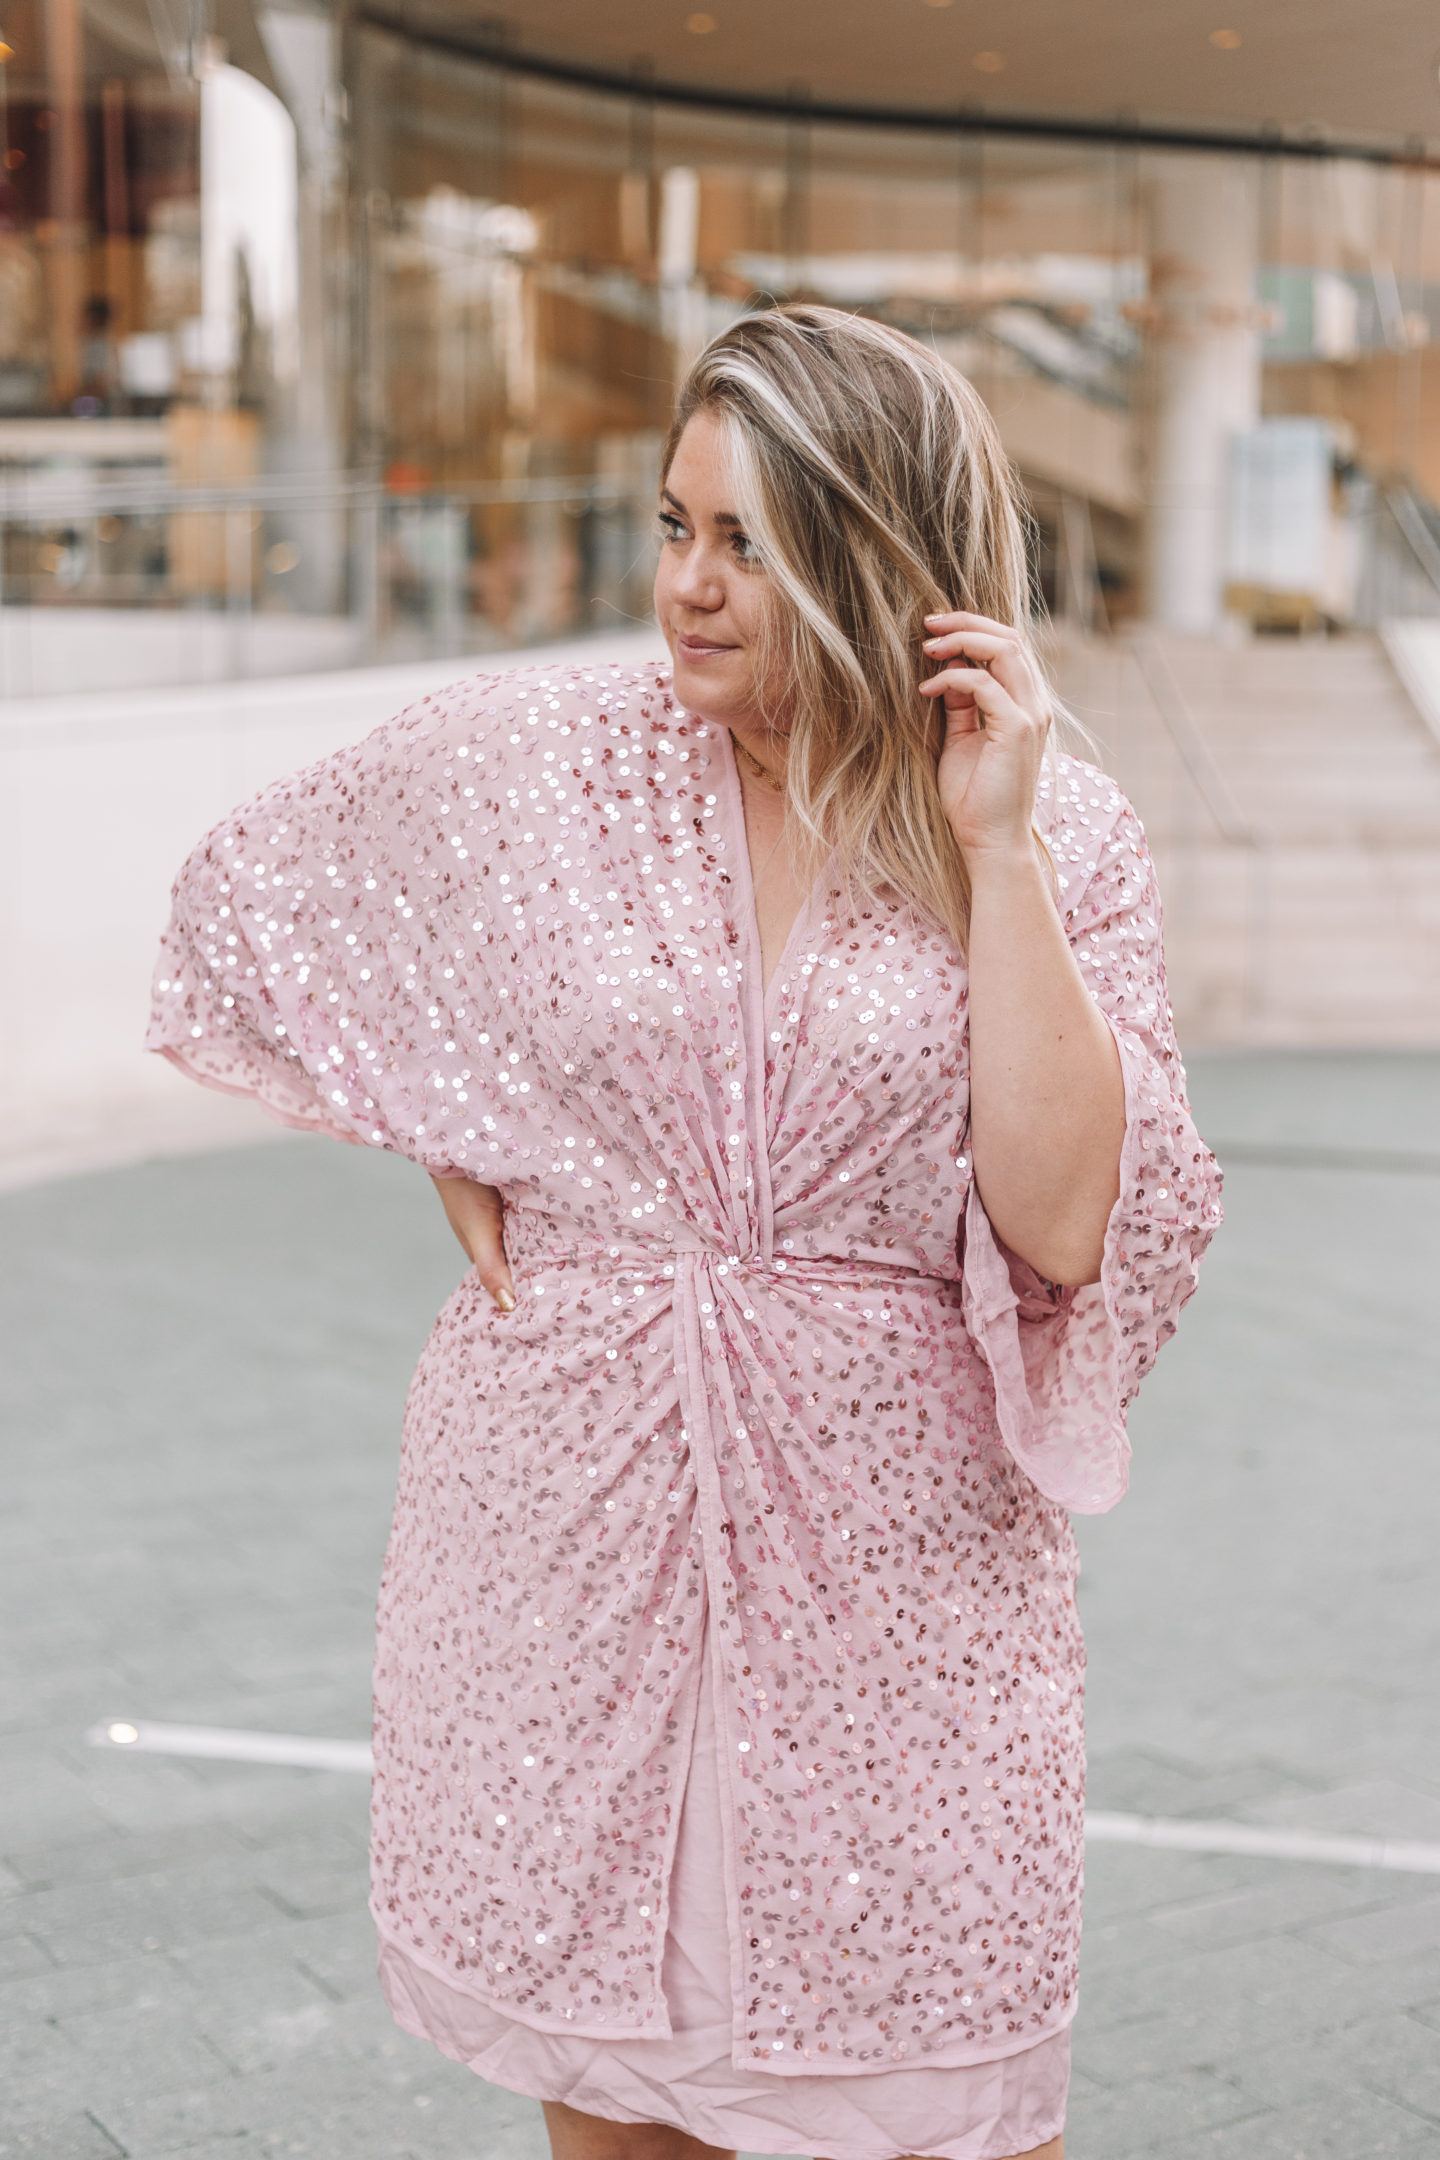 New Years Eve 2019 Dress Roundup, pink sequin dress